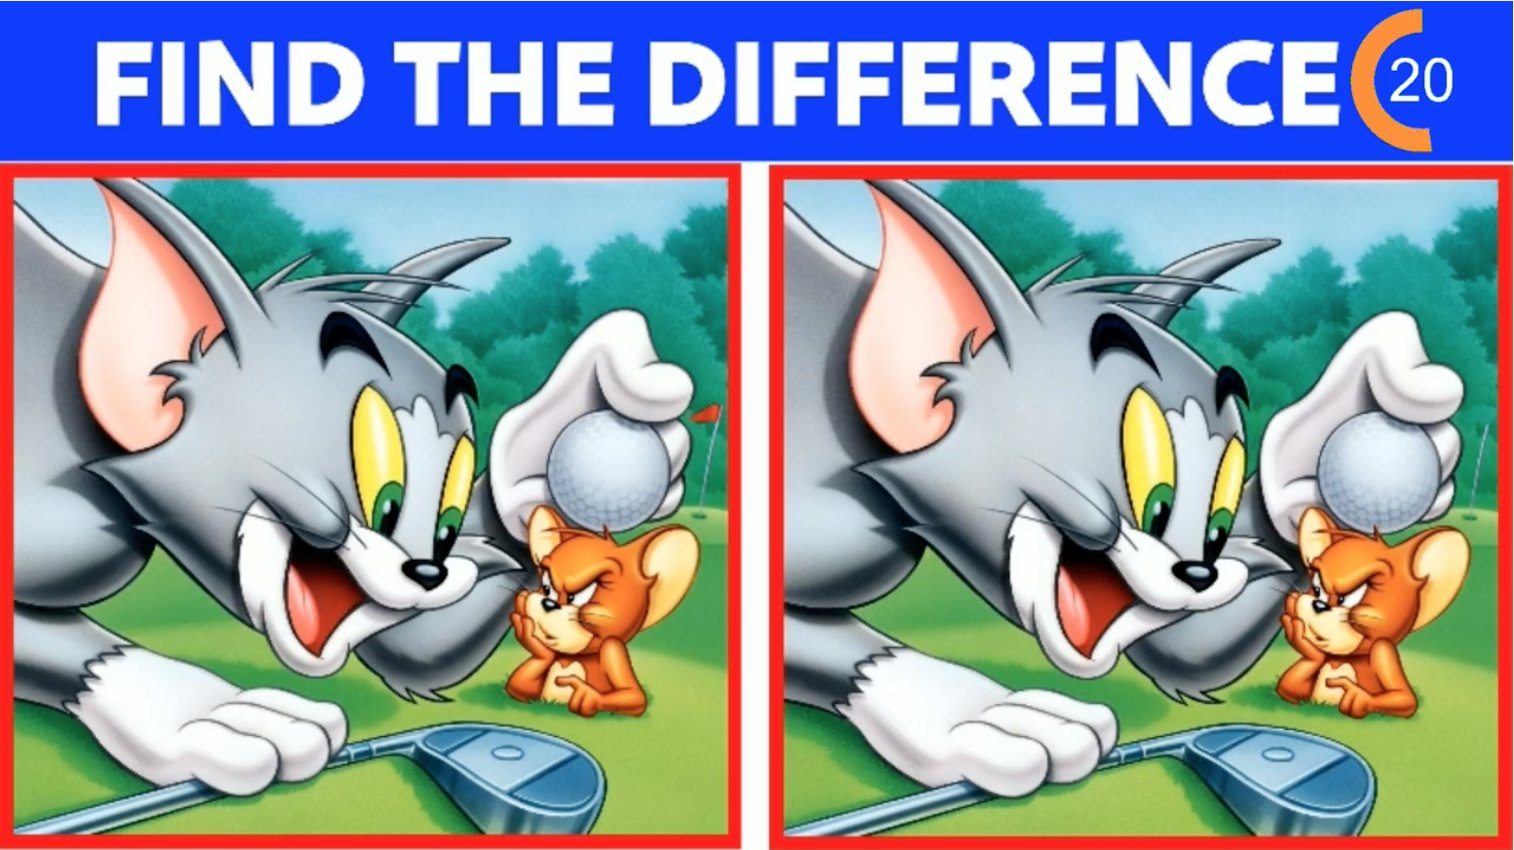 tom and jerry photo 1.png?resize=412,275 - Can You Spot The Difference Between These Two Tom And Jerry Photos?